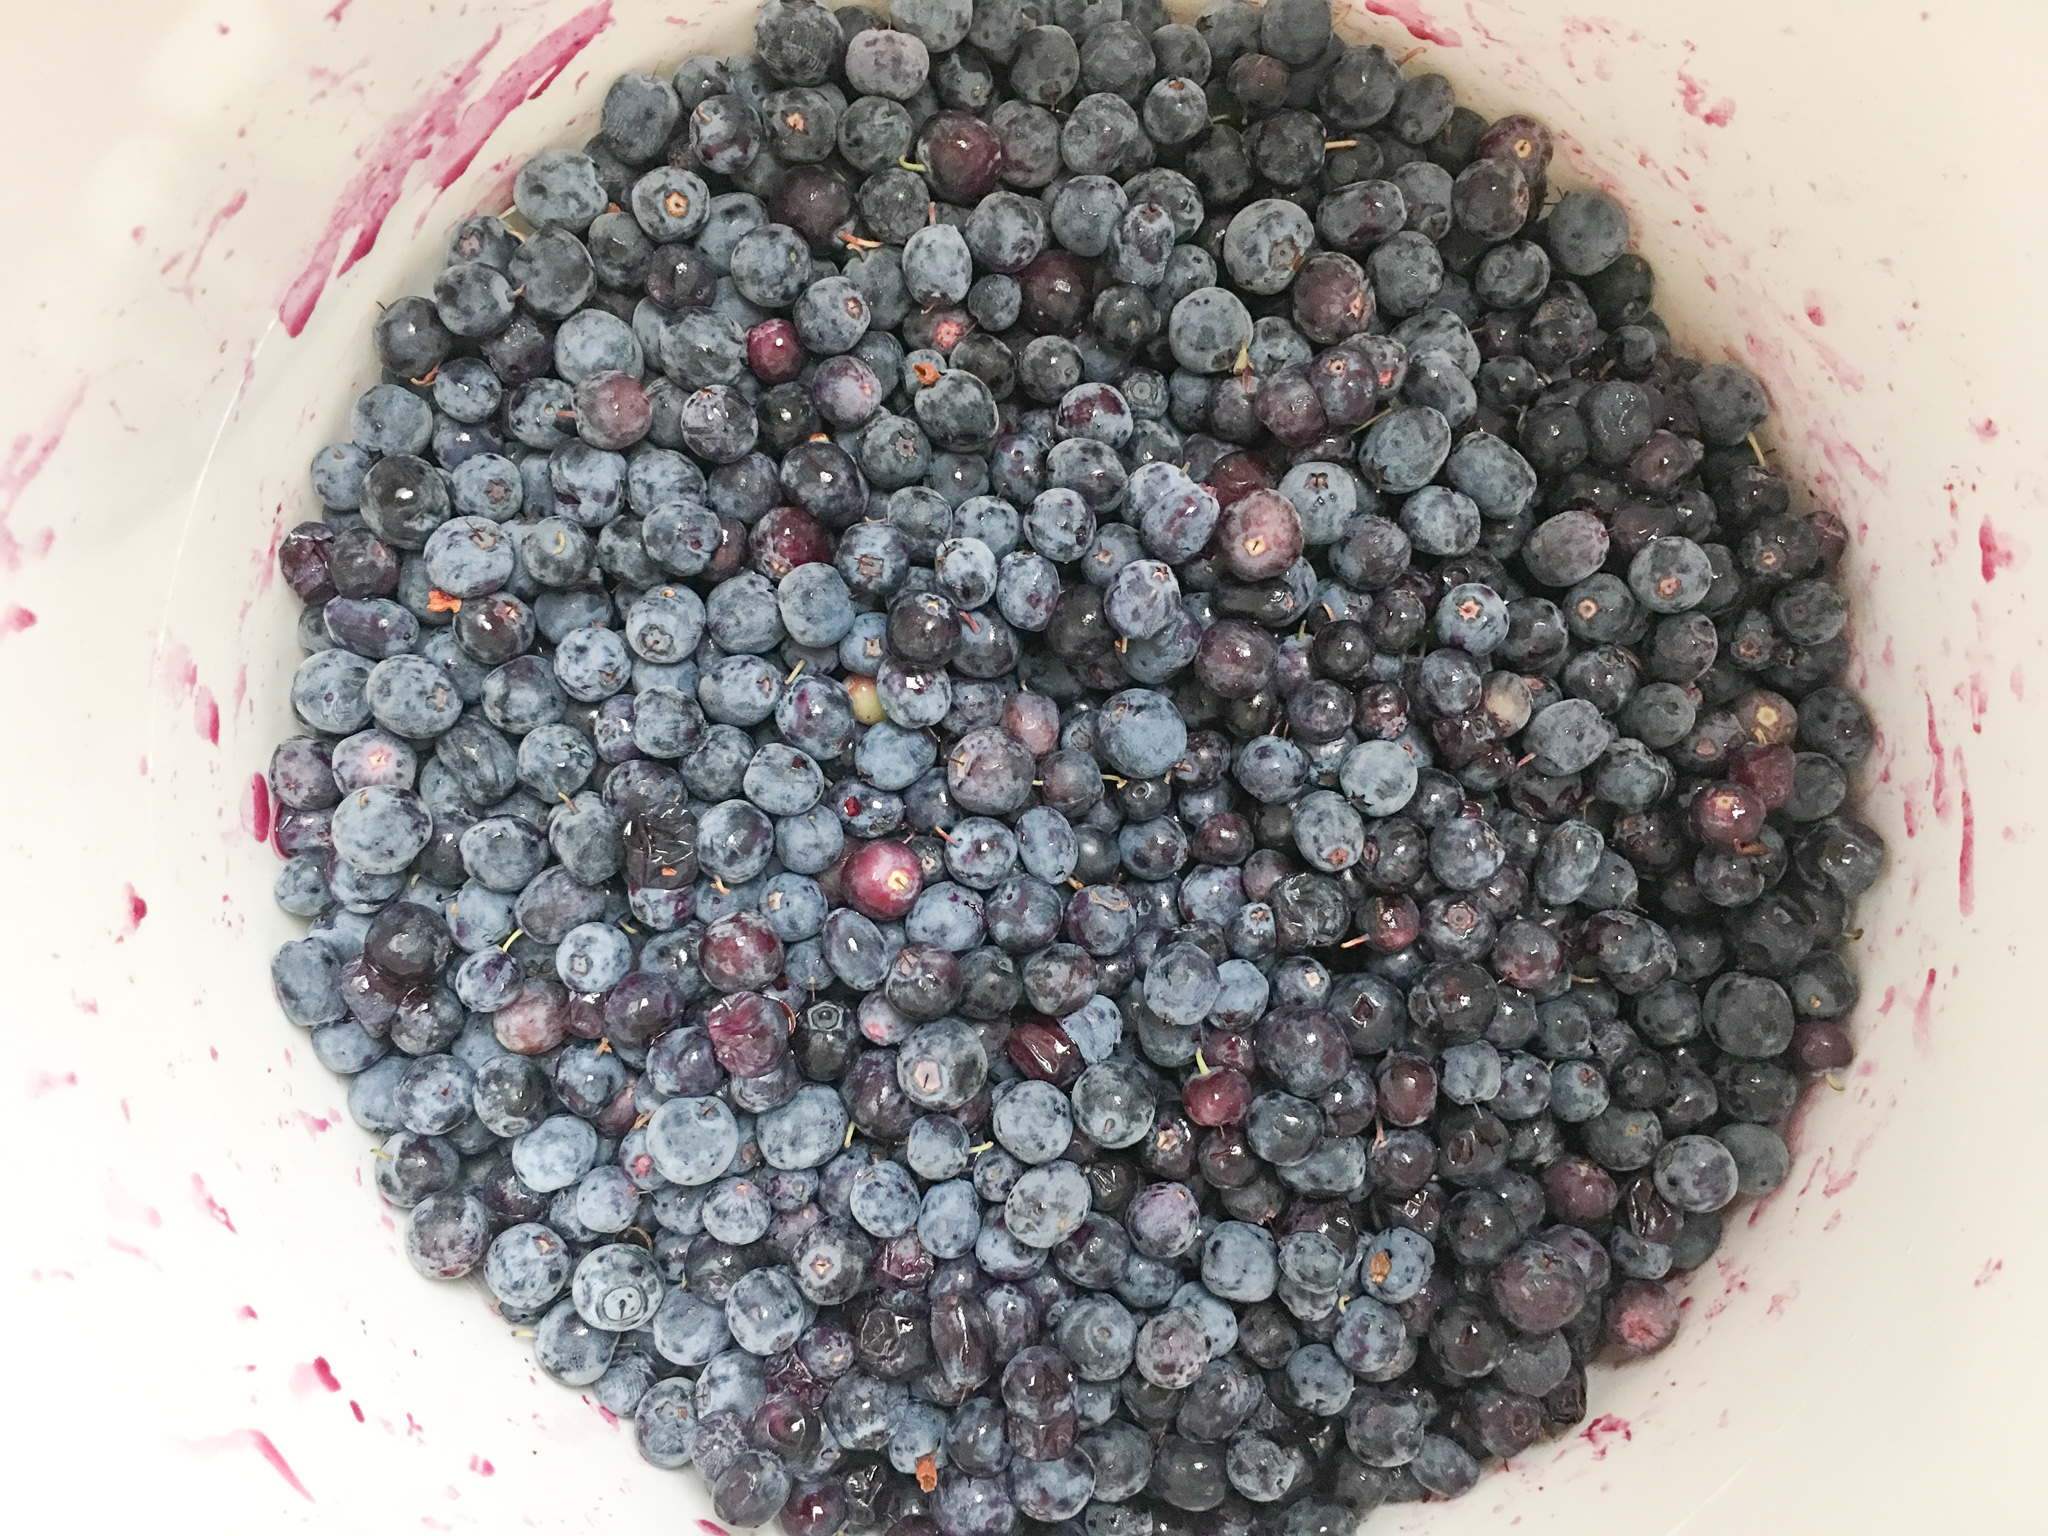 Tips for Picking Wild Berries